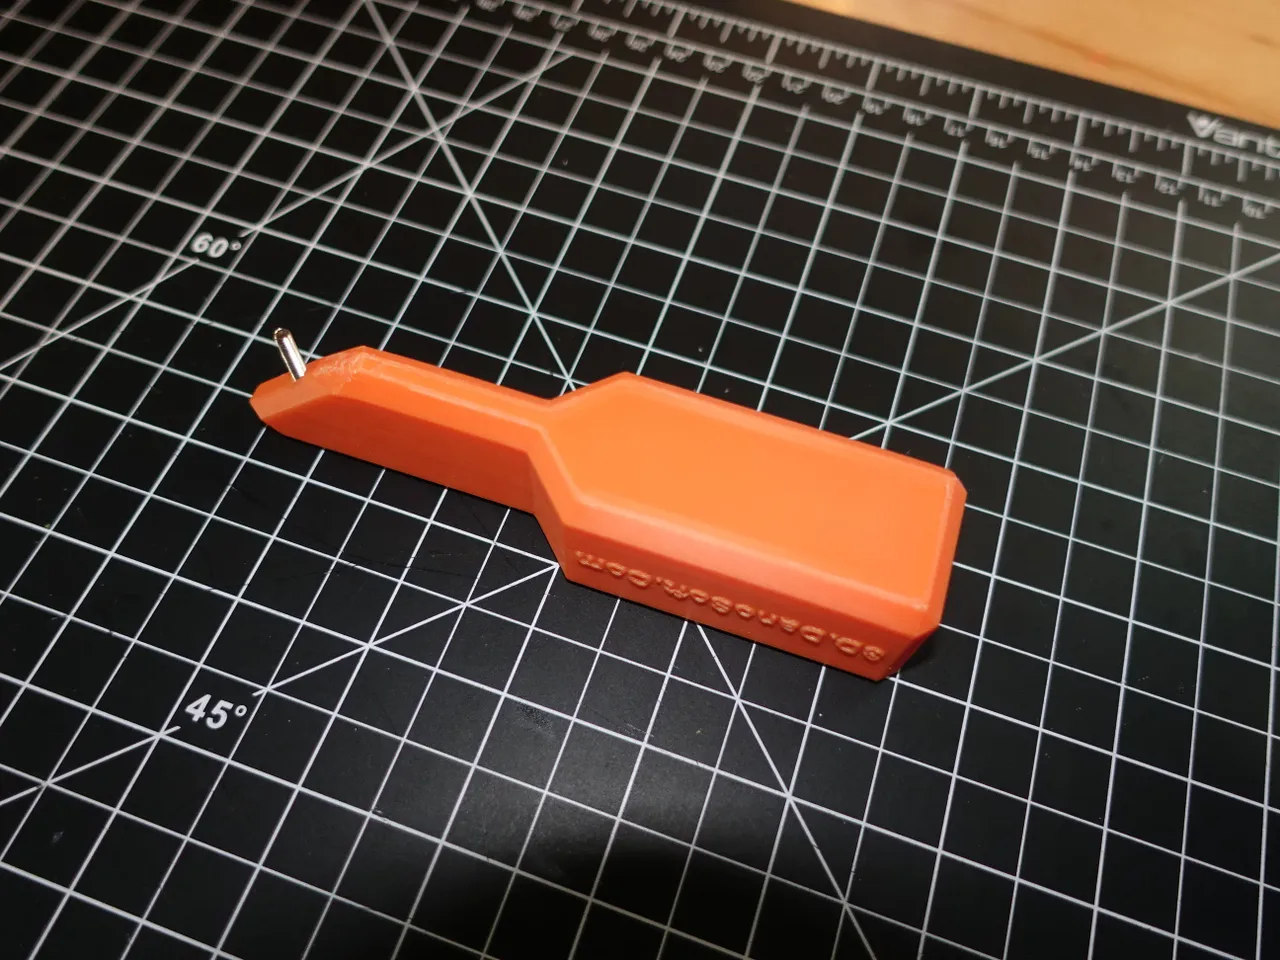 Weeding Tool Cleaner by 3dPrintingJoey